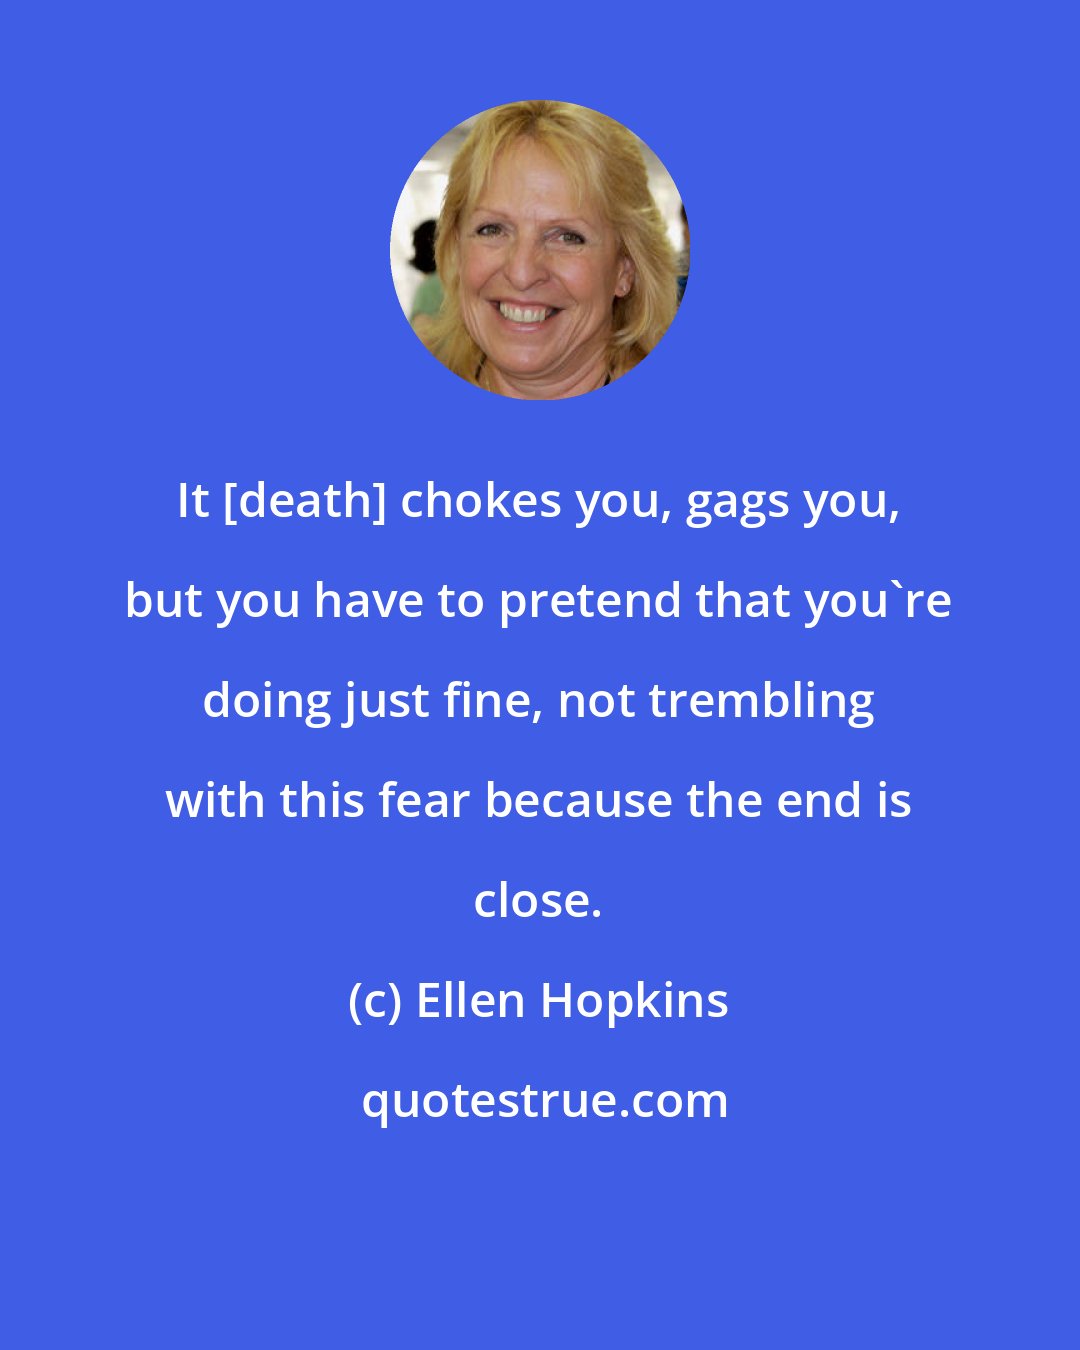 Ellen Hopkins: It [death] chokes you, gags you, but you have to pretend that you're doing just fine, not trembling with this fear because the end is close.